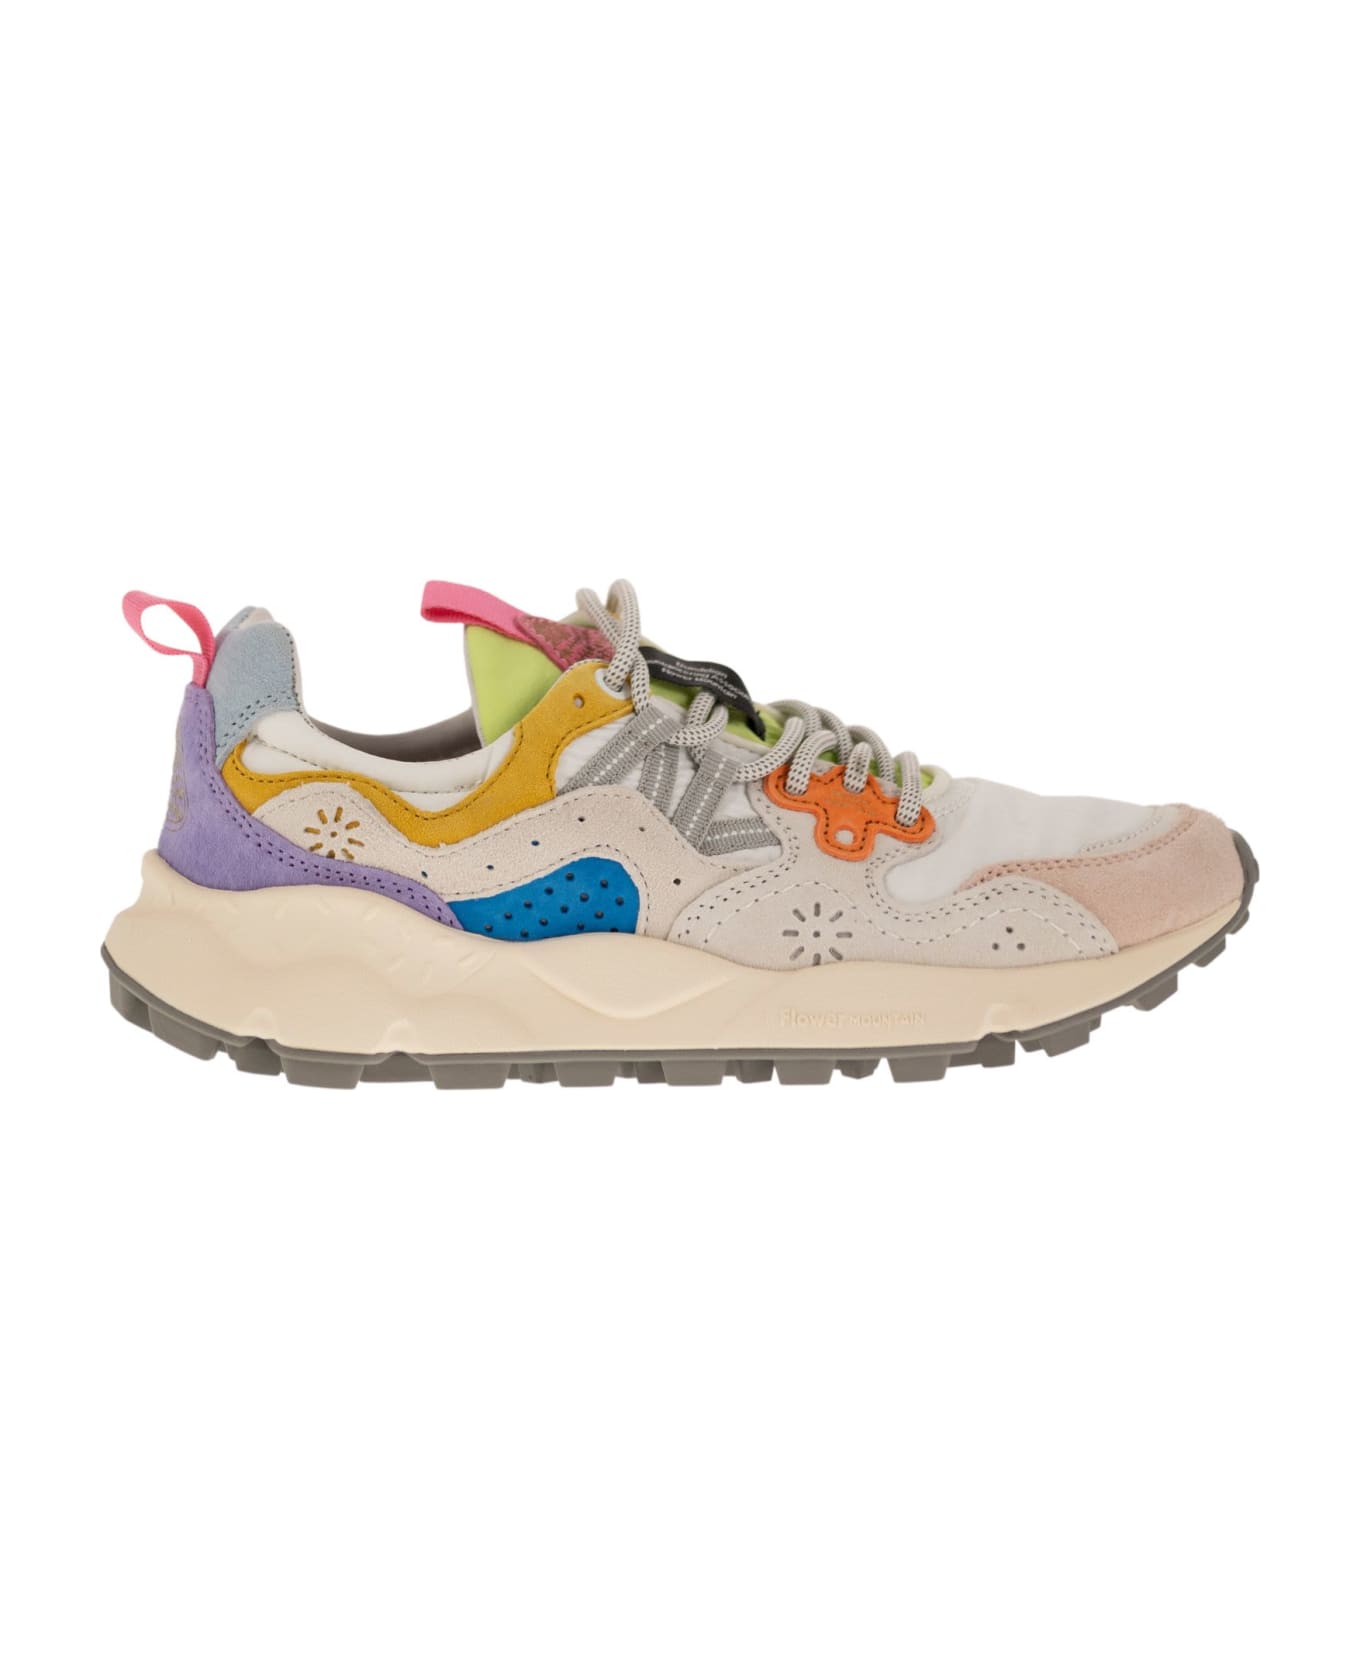 Flower Mountain Yamano 3 - Sneakers In Suede And Technical Fabric - White/pink スニーカー